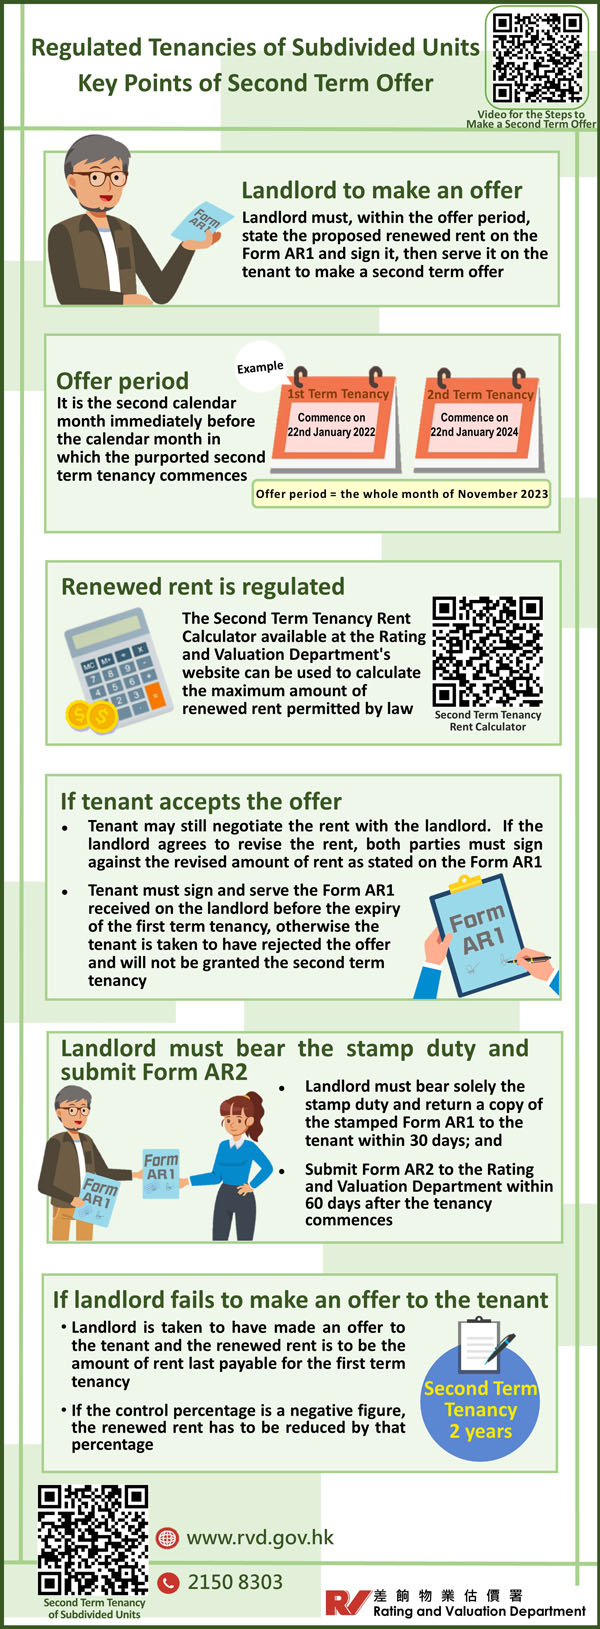 Regulated Tenancies of Subdivided Units Key Points of Second Term Offer